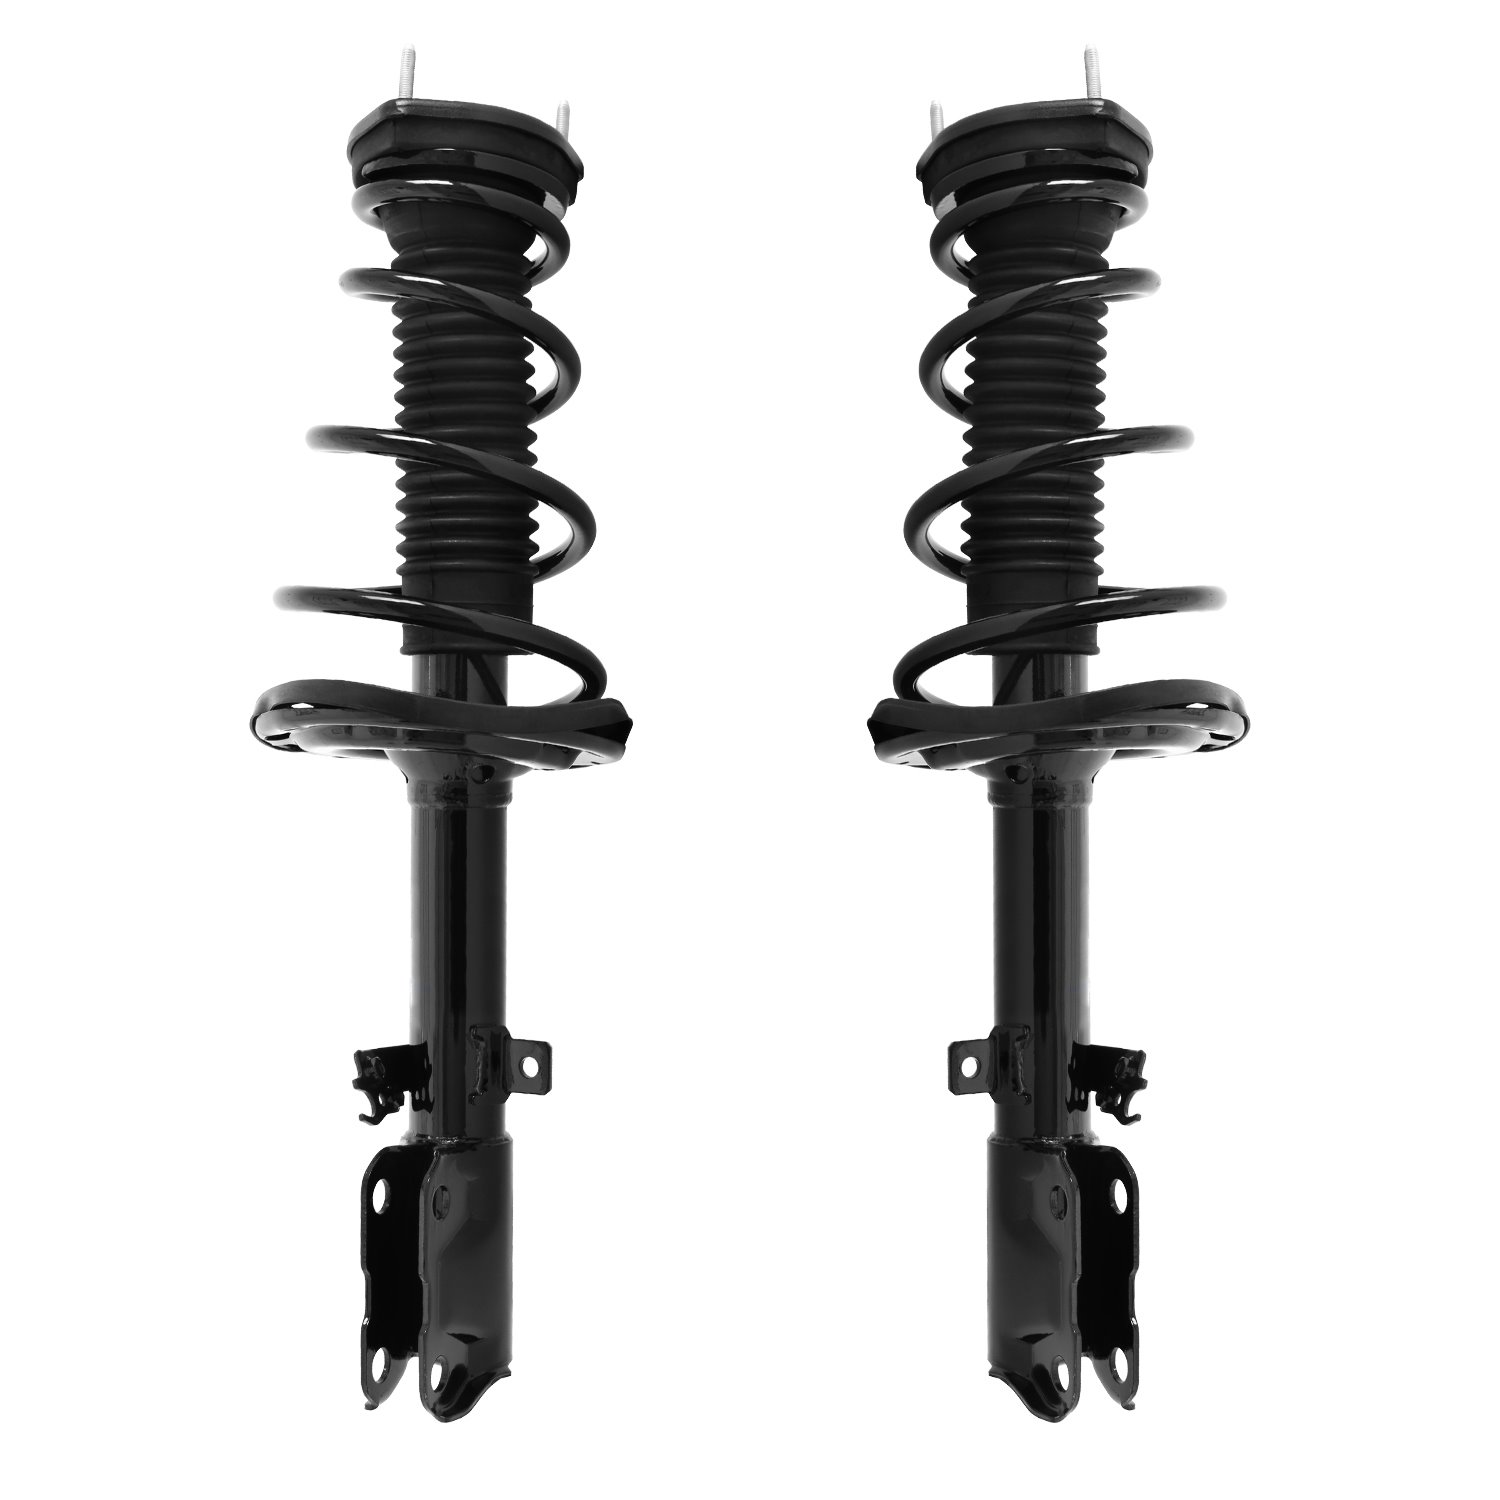 2-15073-15074-001 Suspension Strut & Coil Spring Assembly Set Fits Select Toyota Camry